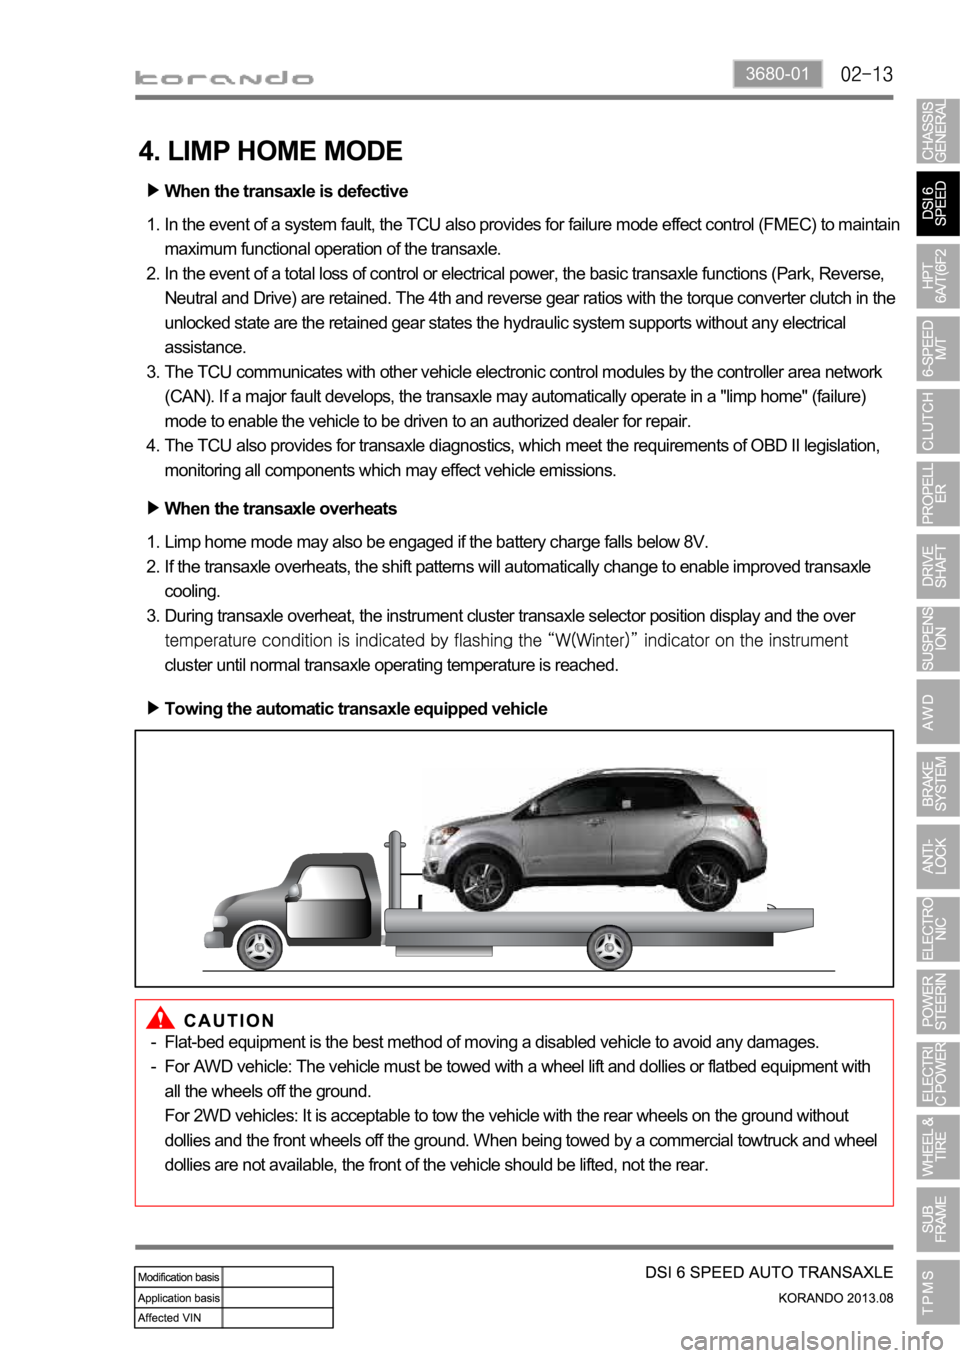 SSANGYONG KORANDO 2013  Service Manual 3680-01
4. LIMP HOME MODE
When the transaxle is defective
In the event of a system fault, the TCU also provides for failure mode effect control (FMEC) to maintain 
maximum functional operation of the 